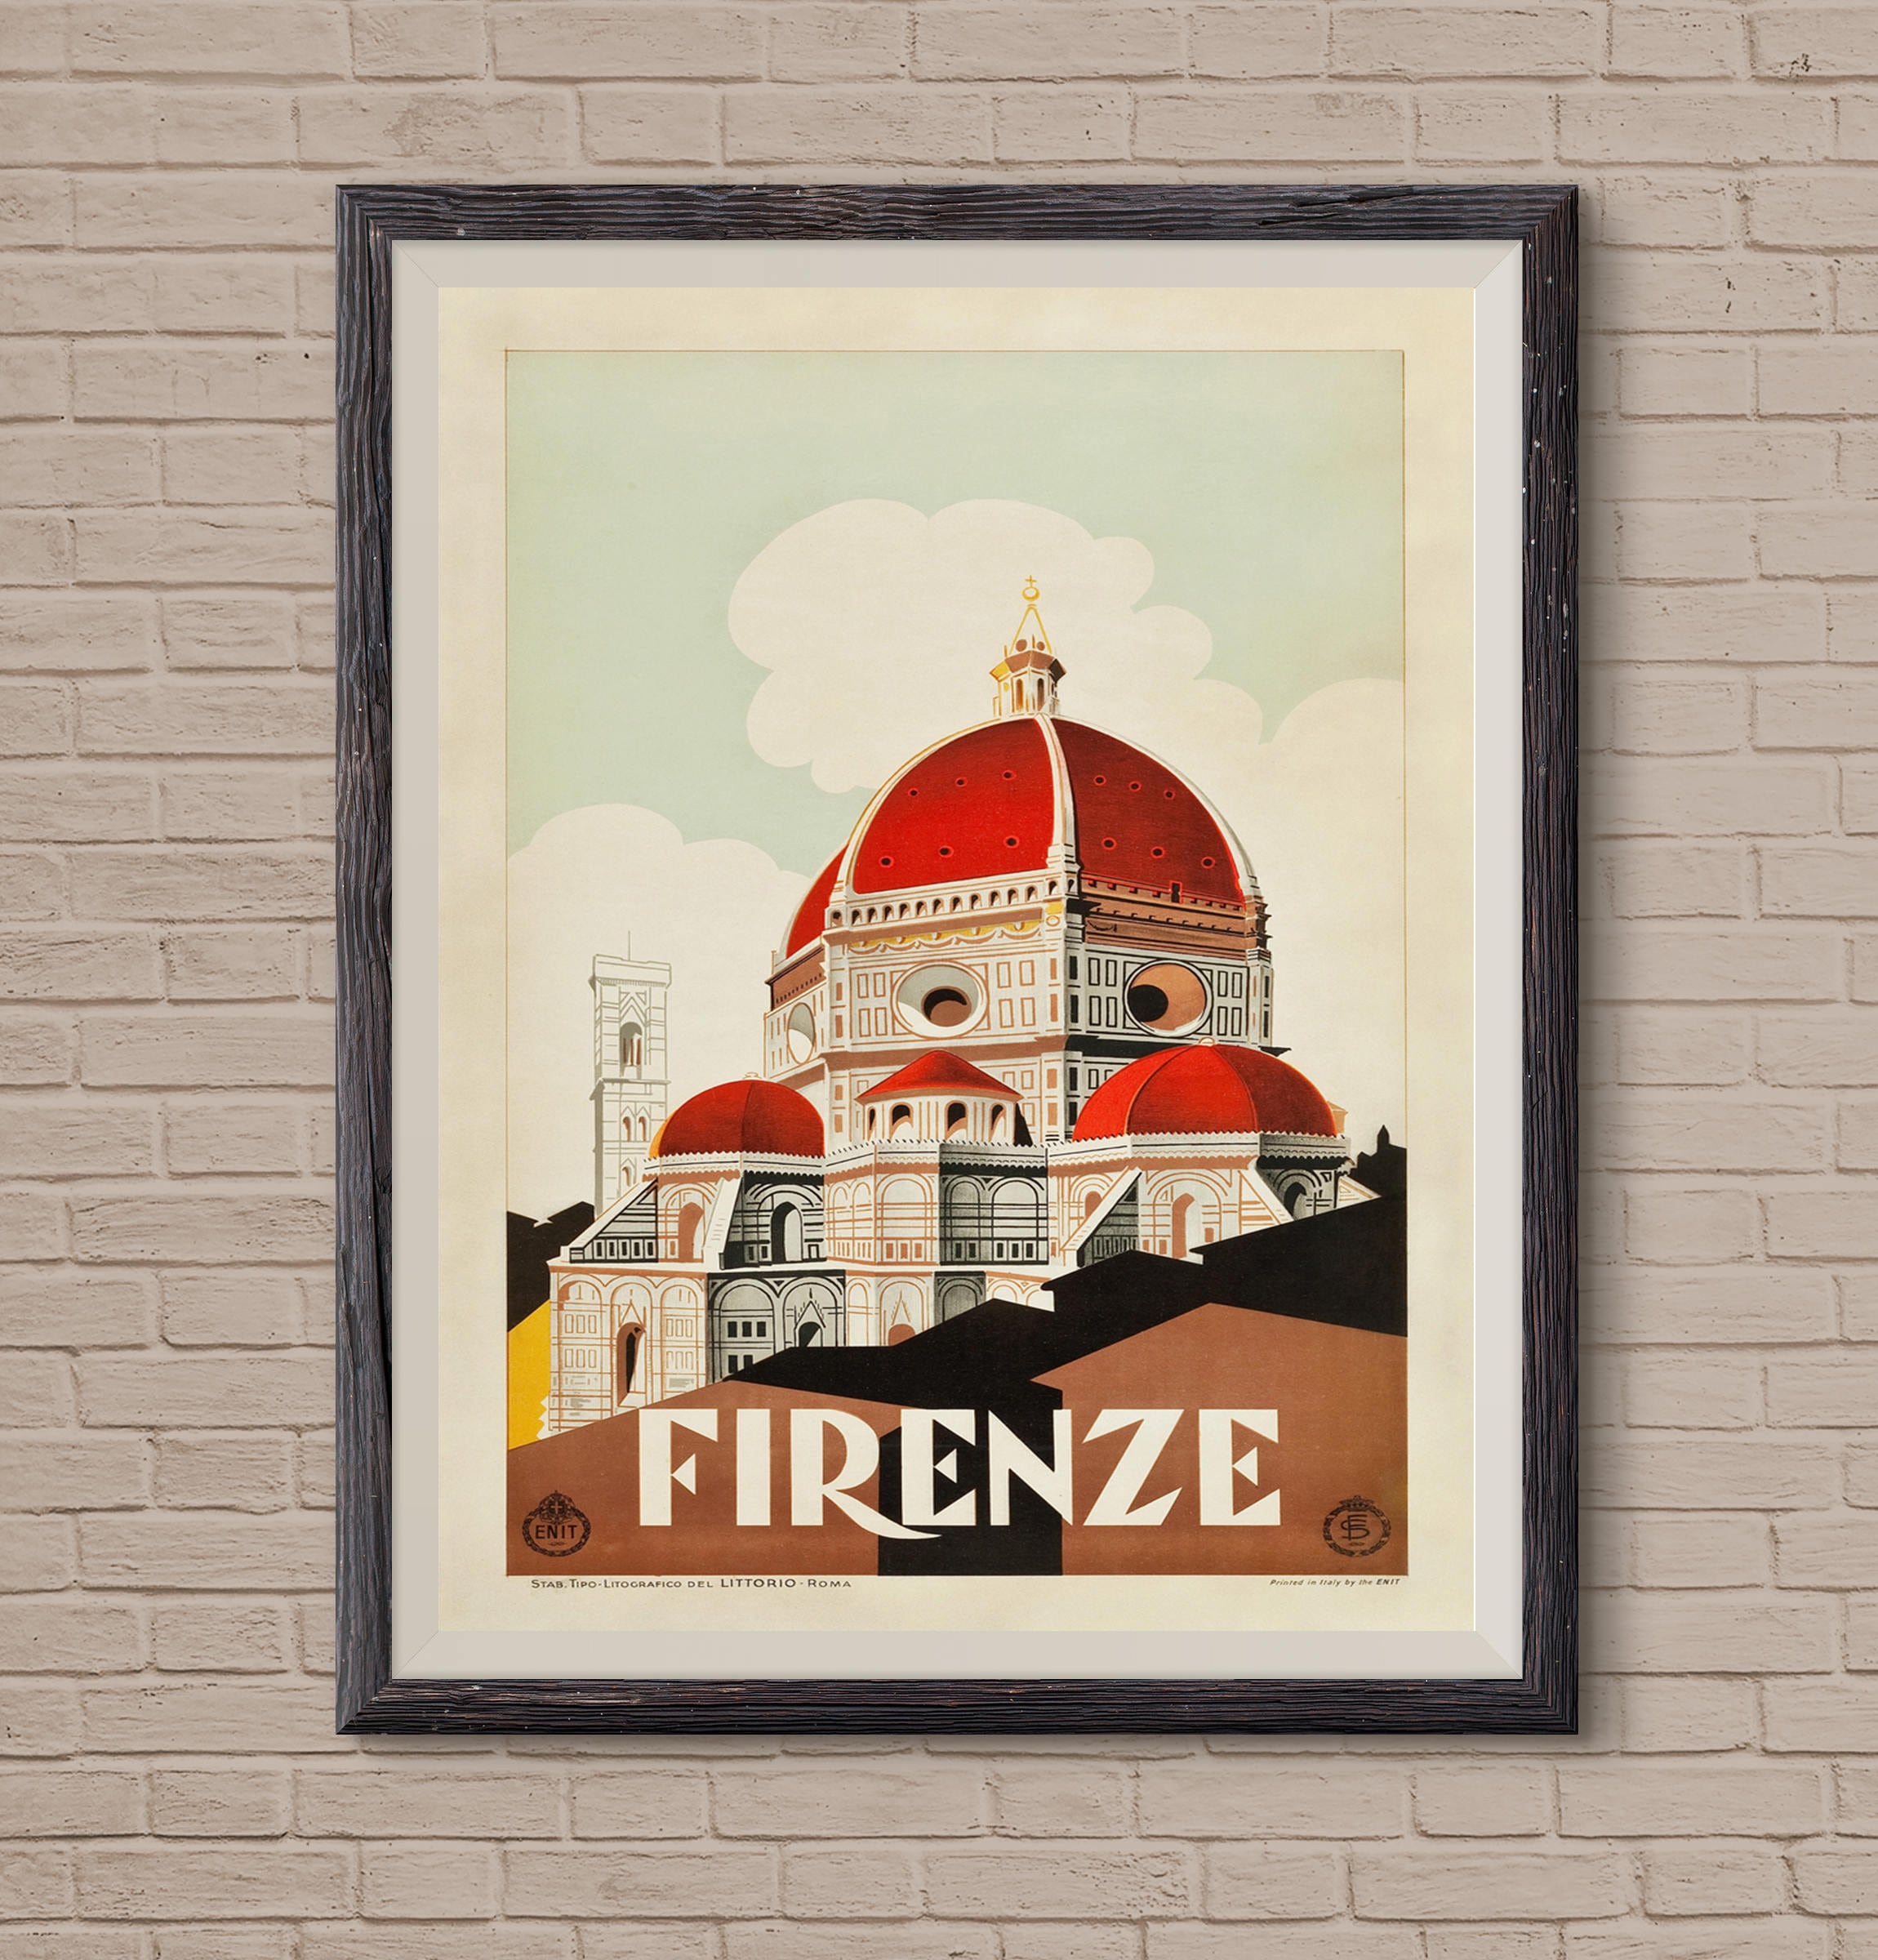 Florencia Florence Italy Vintage Travel Wall Decor Advertisement Poster Print 